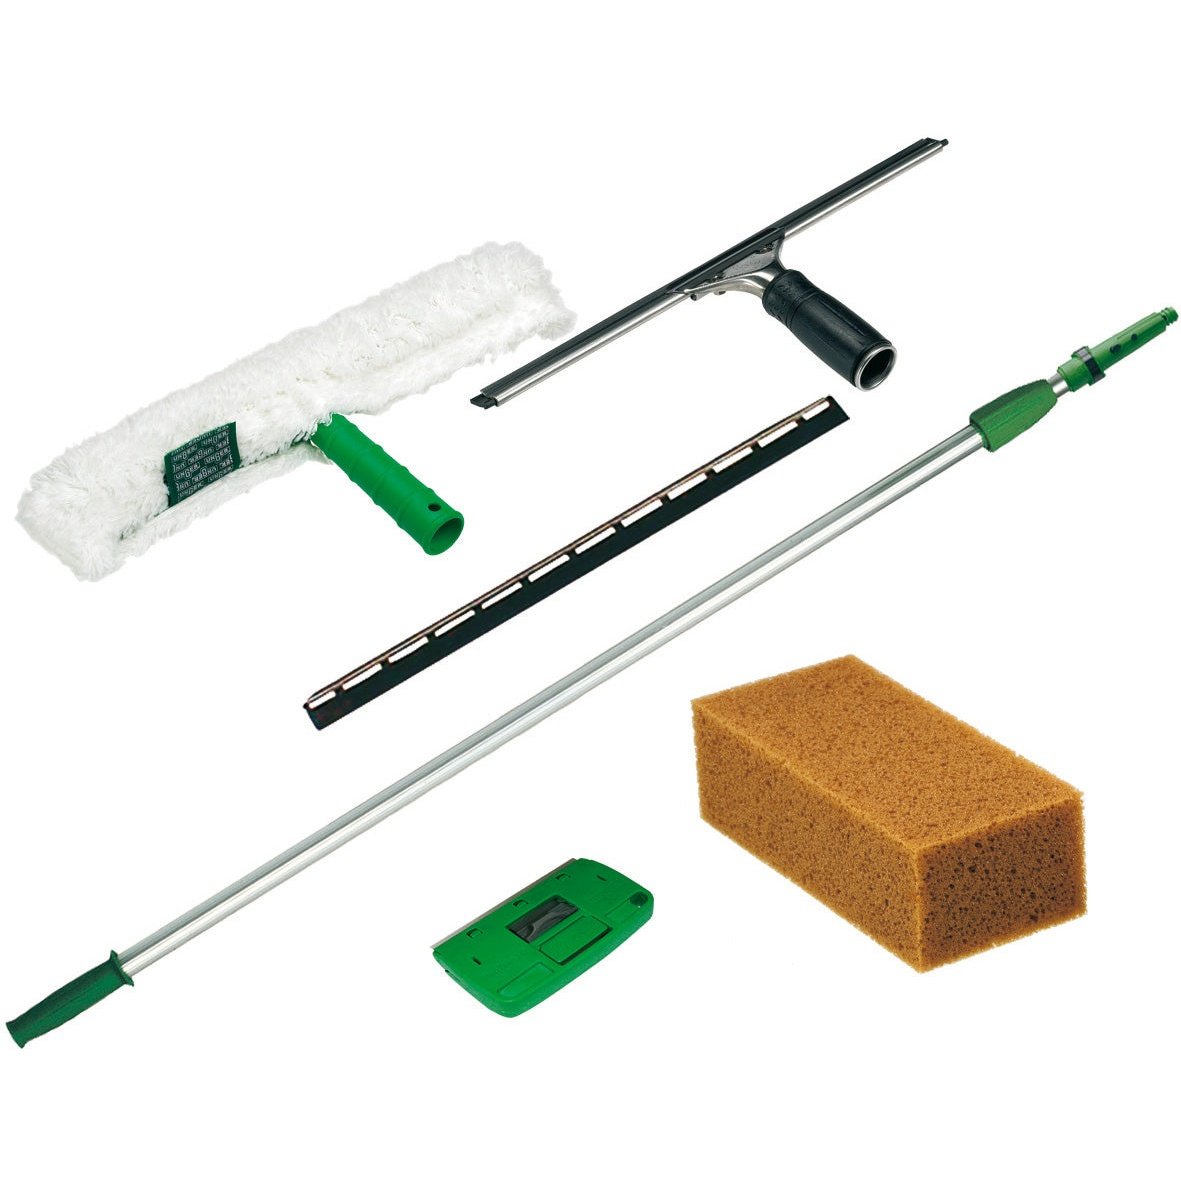 Pro glass cleaning set